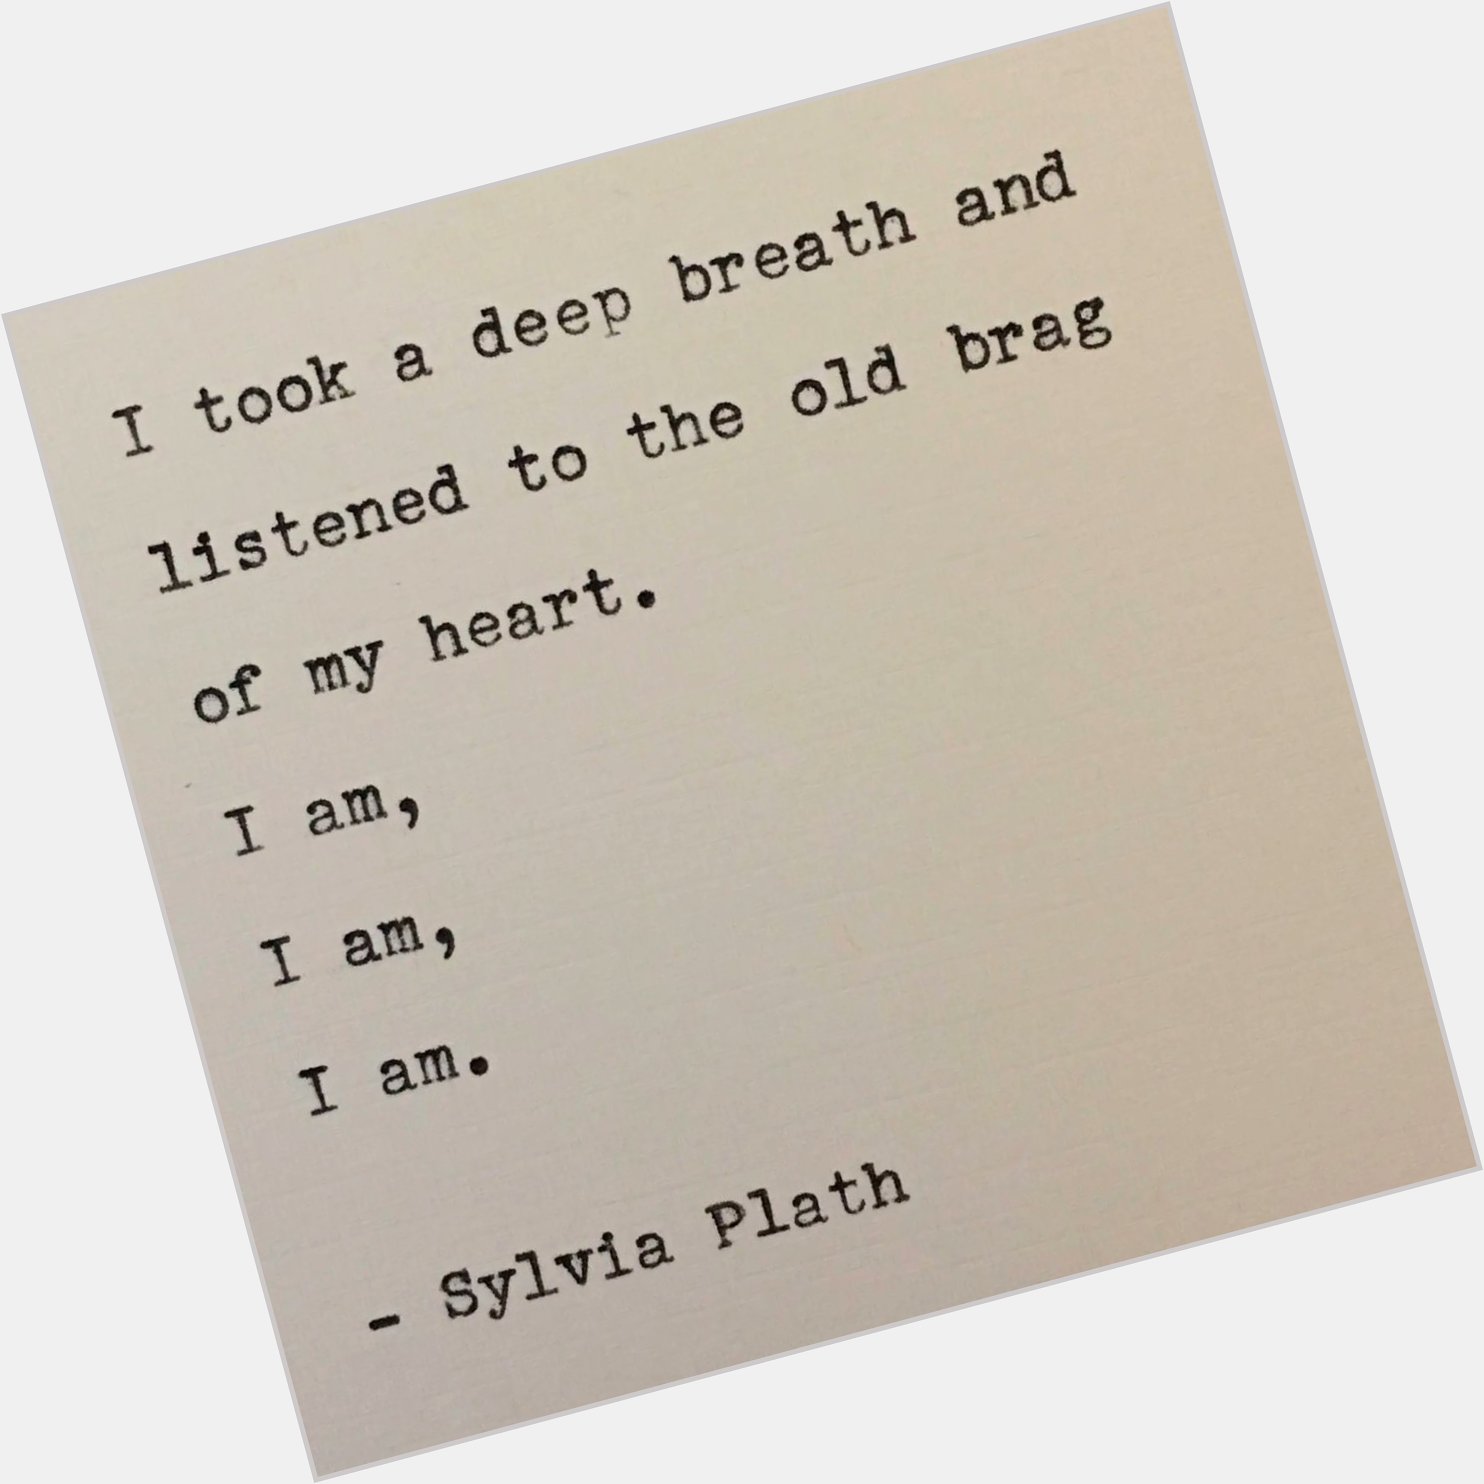 Happy Birthday, Sylvia Plath, who would have been 90 years old today. 